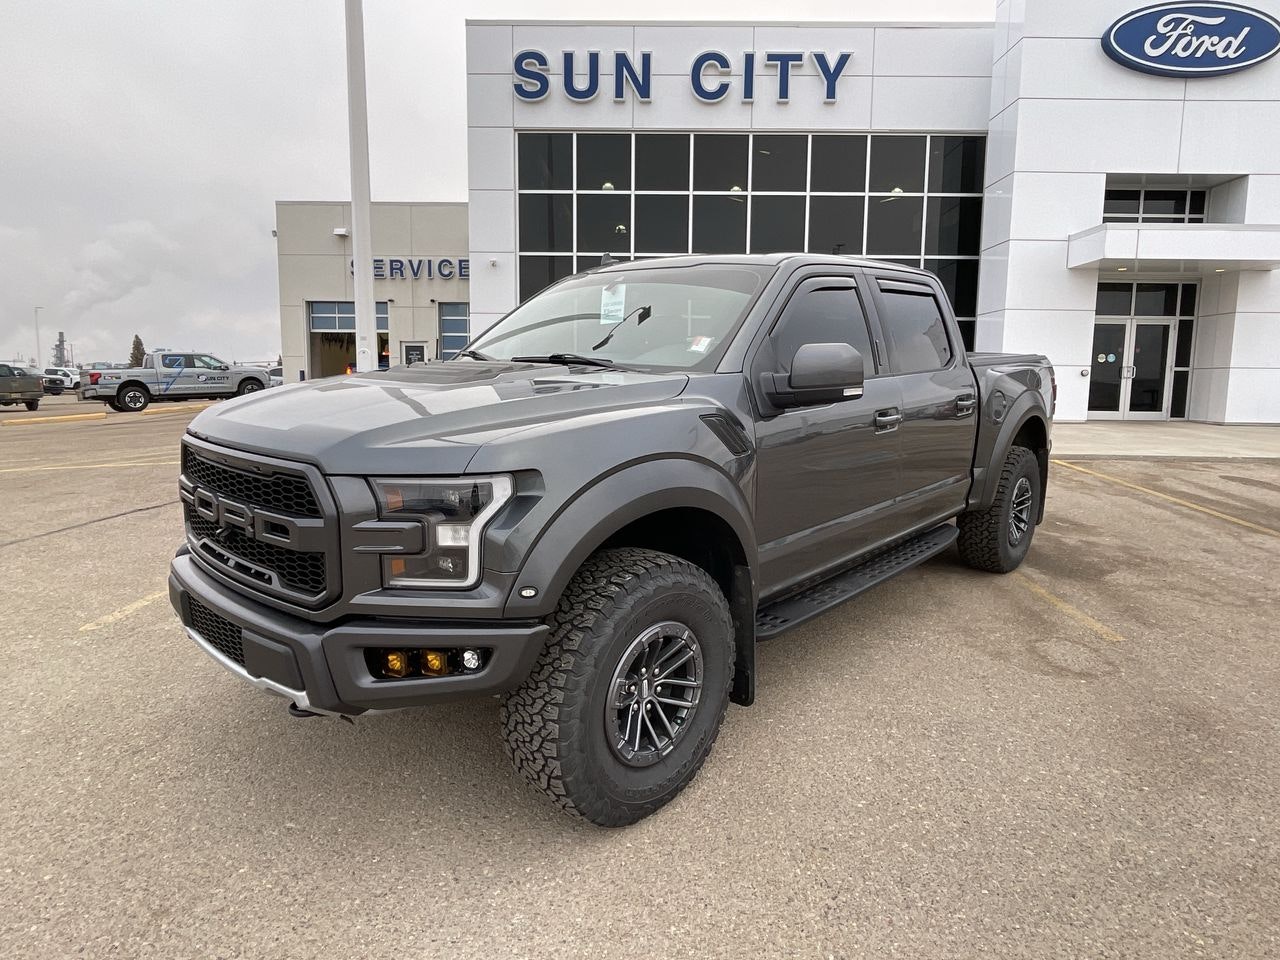 2020 Ford F-150 Raptor 802A CARBON FIBRE PACKAGE+FORGED WHEELS (T123119A) Main Image